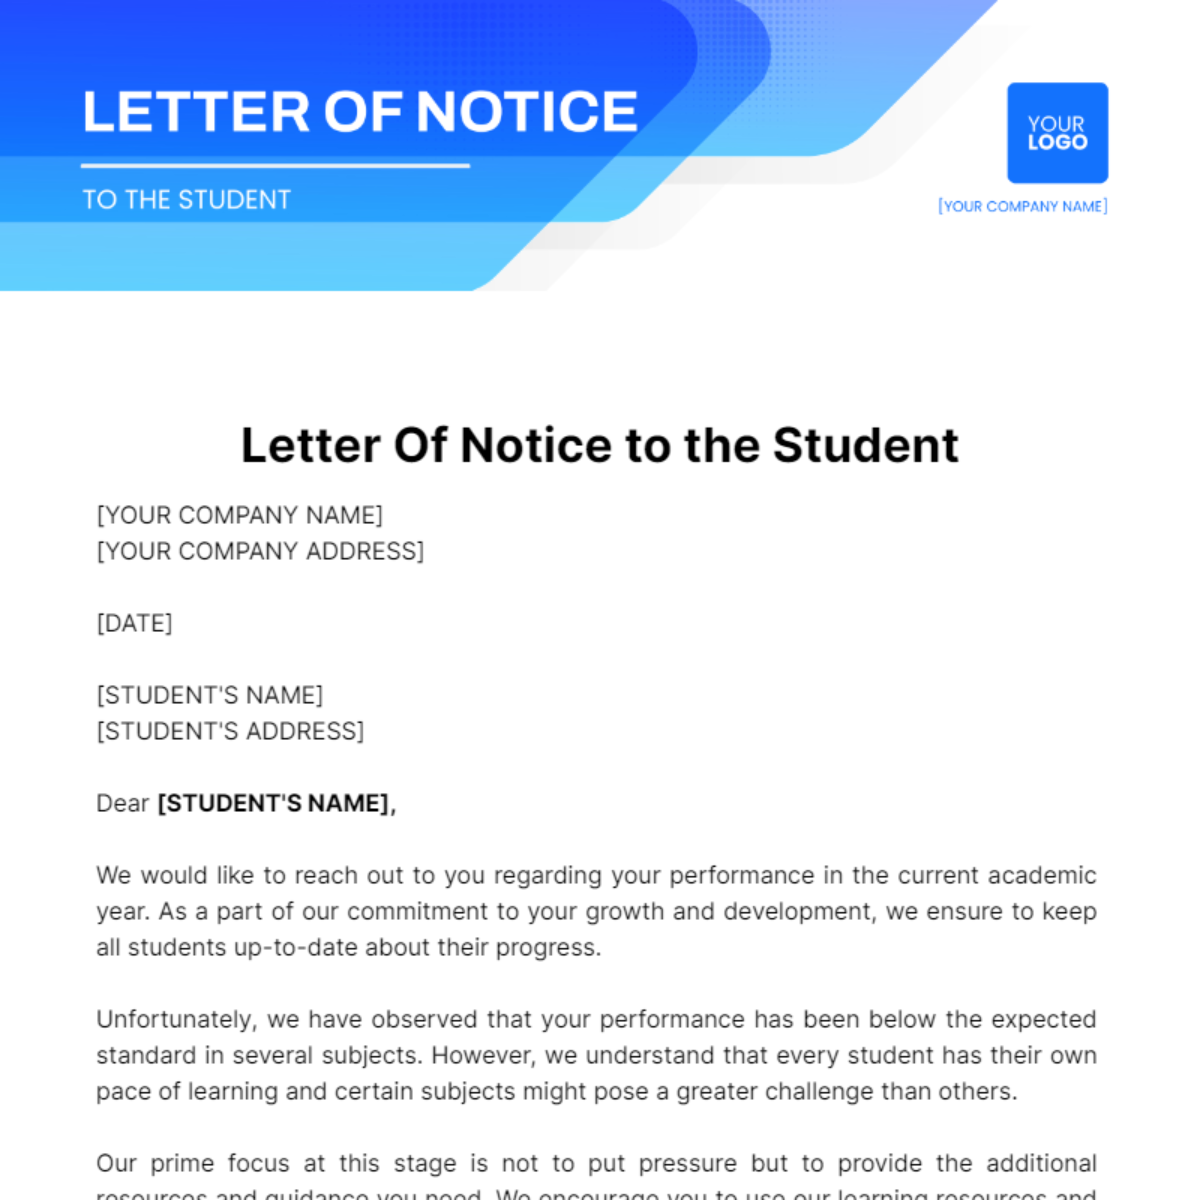 Letter Of Notice to the Student Template